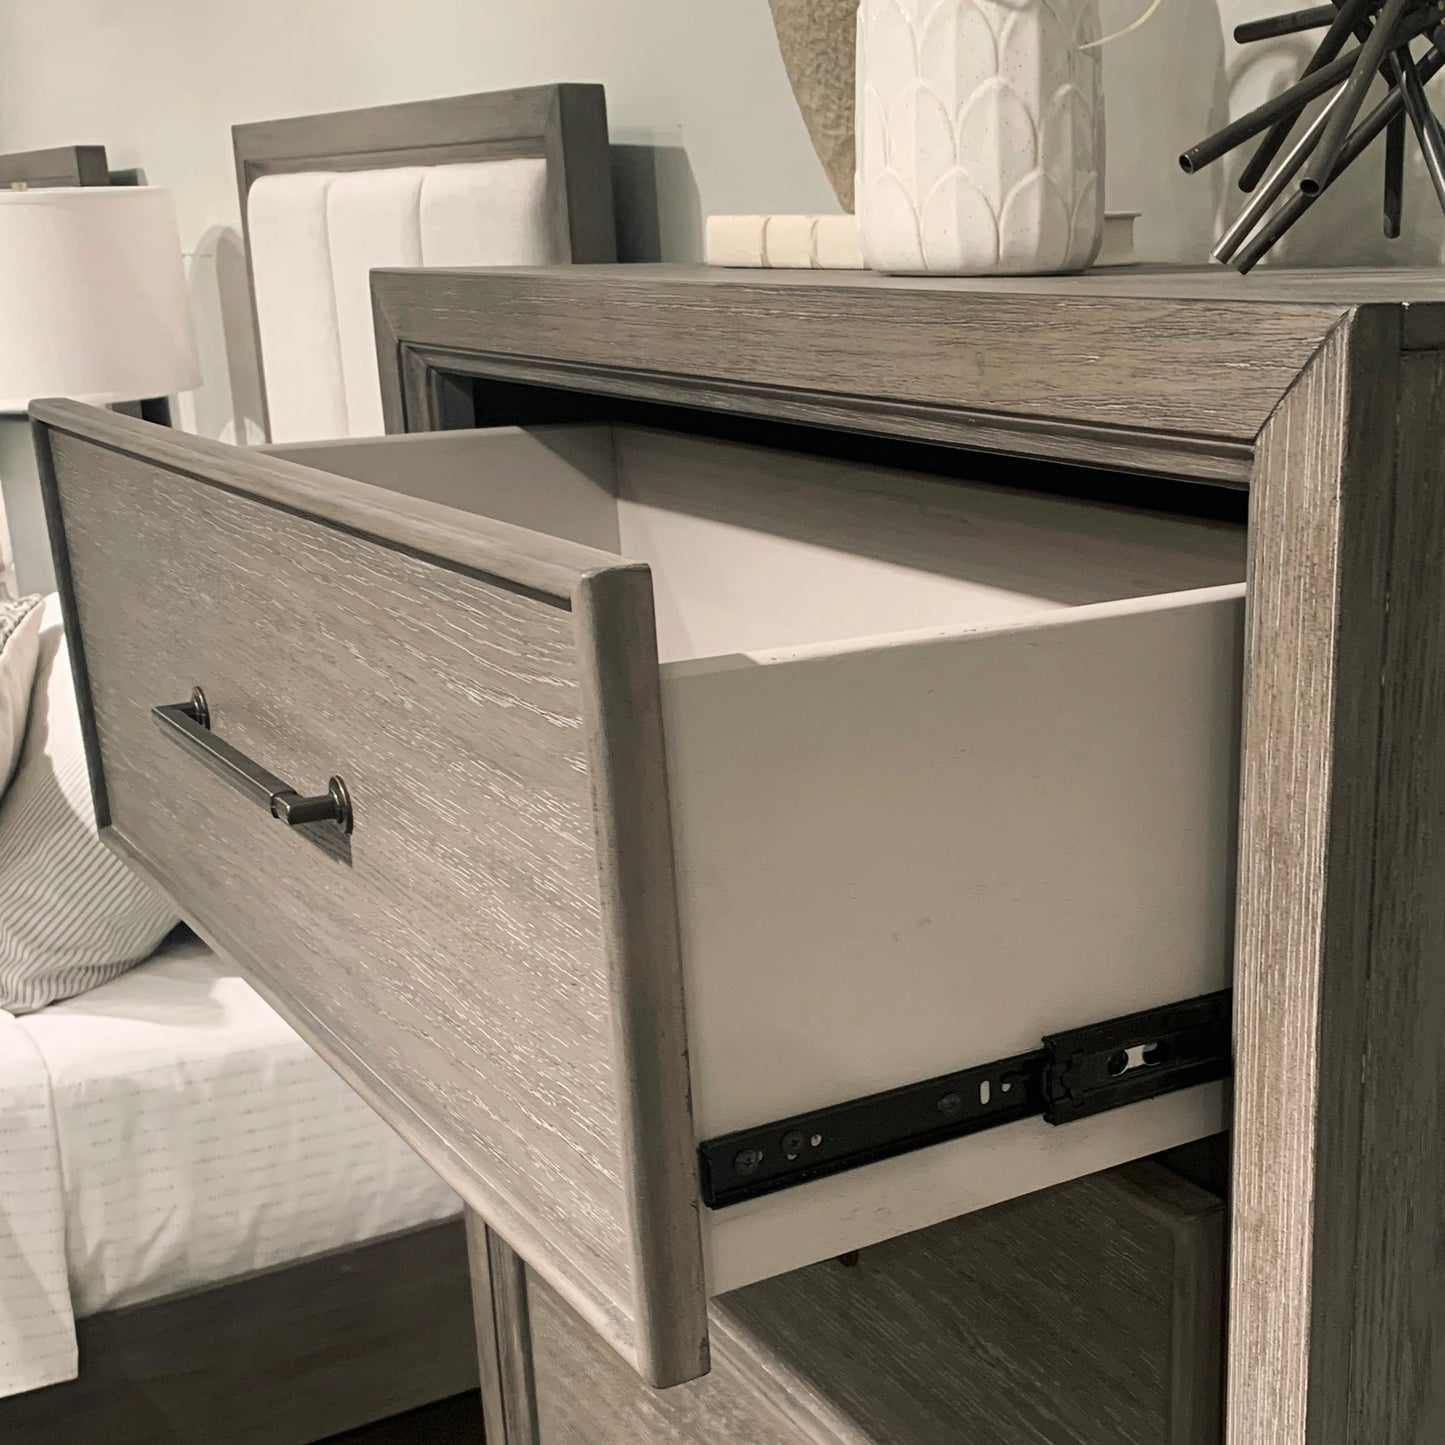 Ennesley Wood 2 Drawers Nightstand with USB Charger, Gray